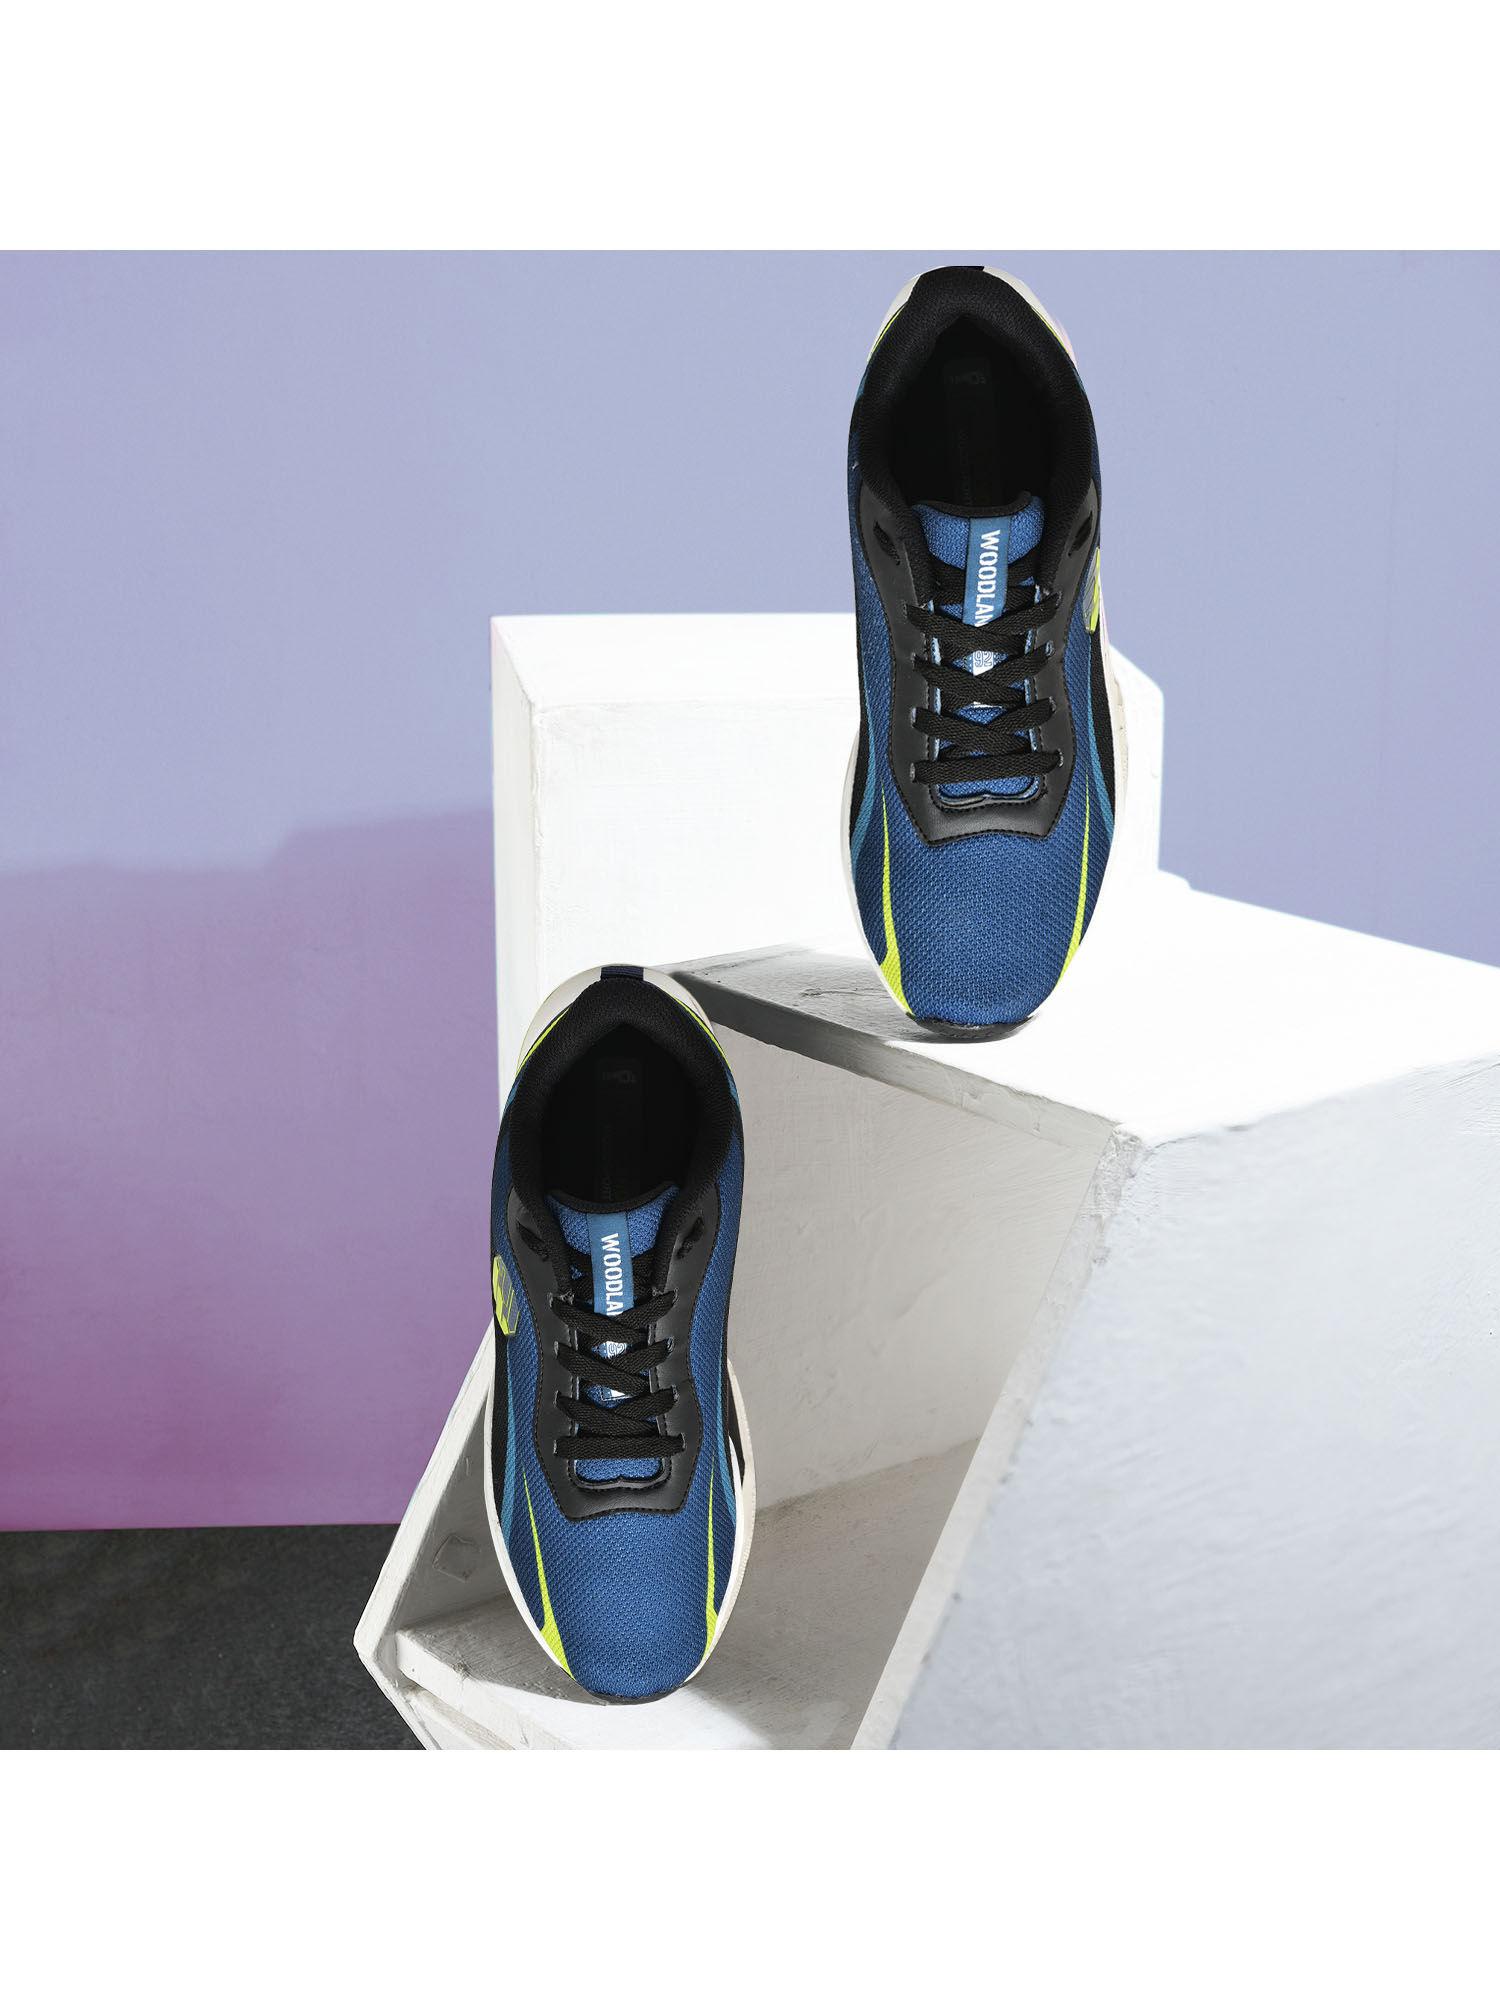 mens navy textured running shoes